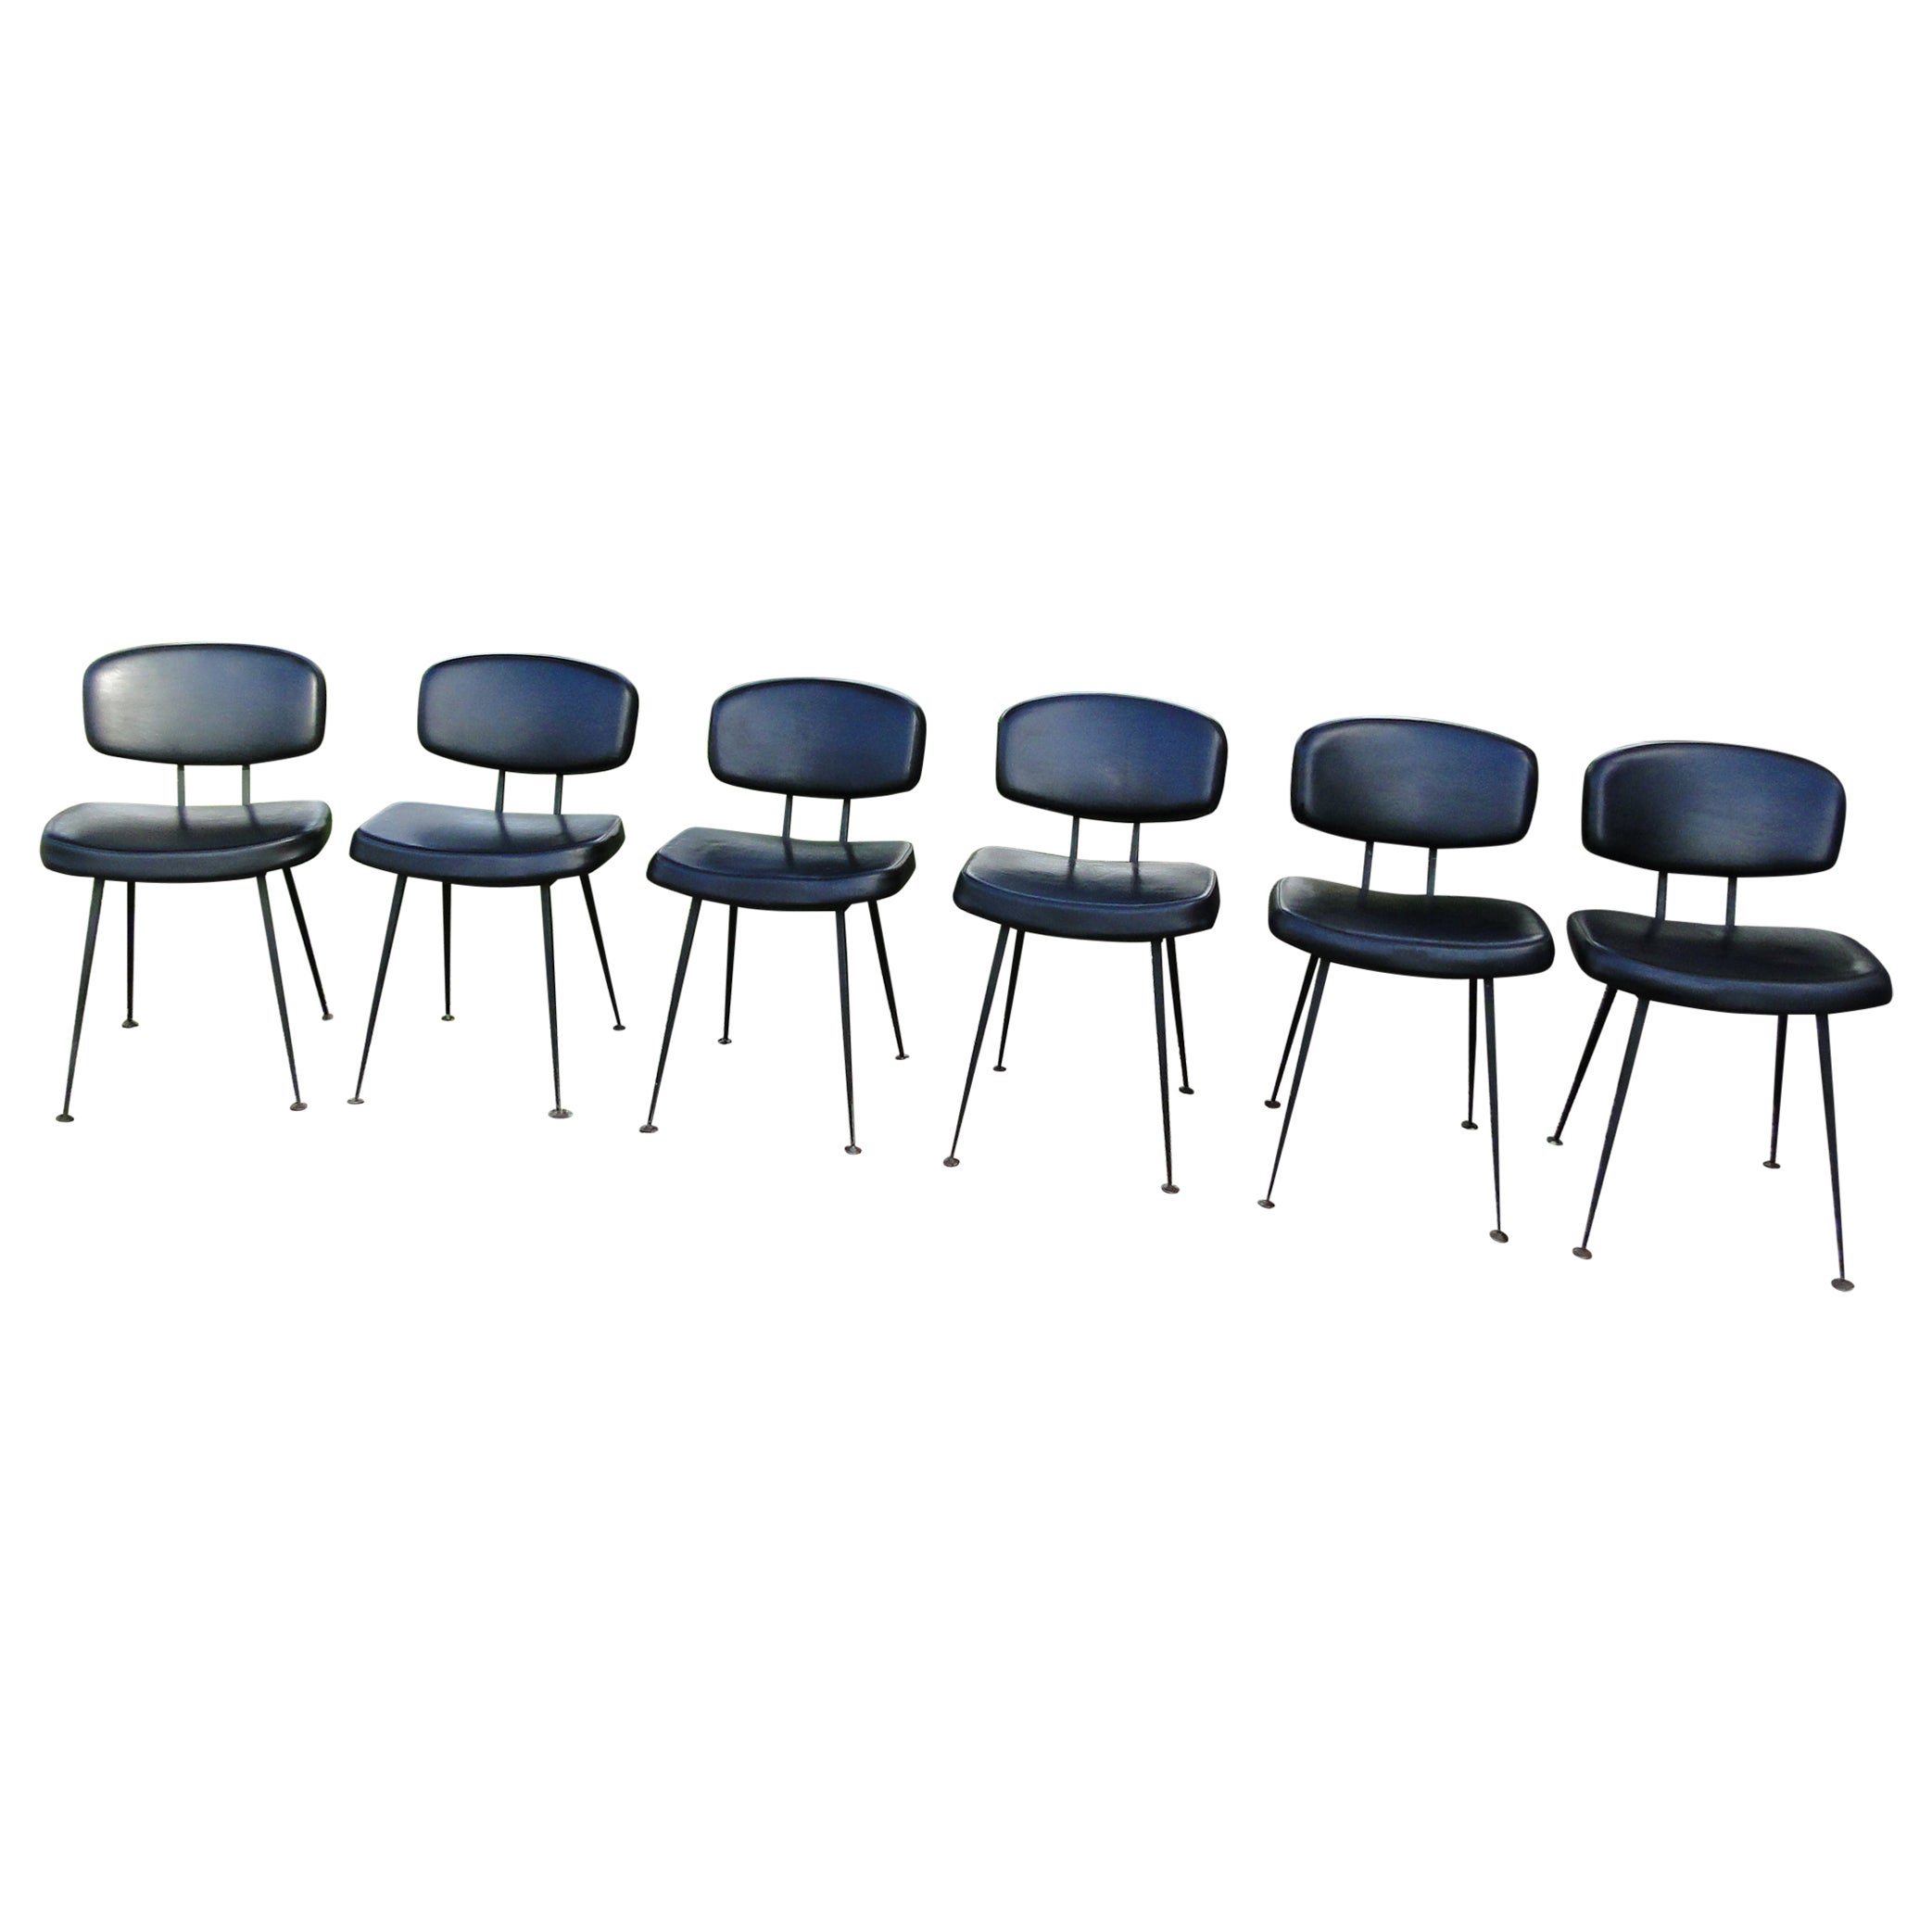 Steiner Airborne 6 Chairs Guariche Paulin Mortier Motte Thonet Arp French 